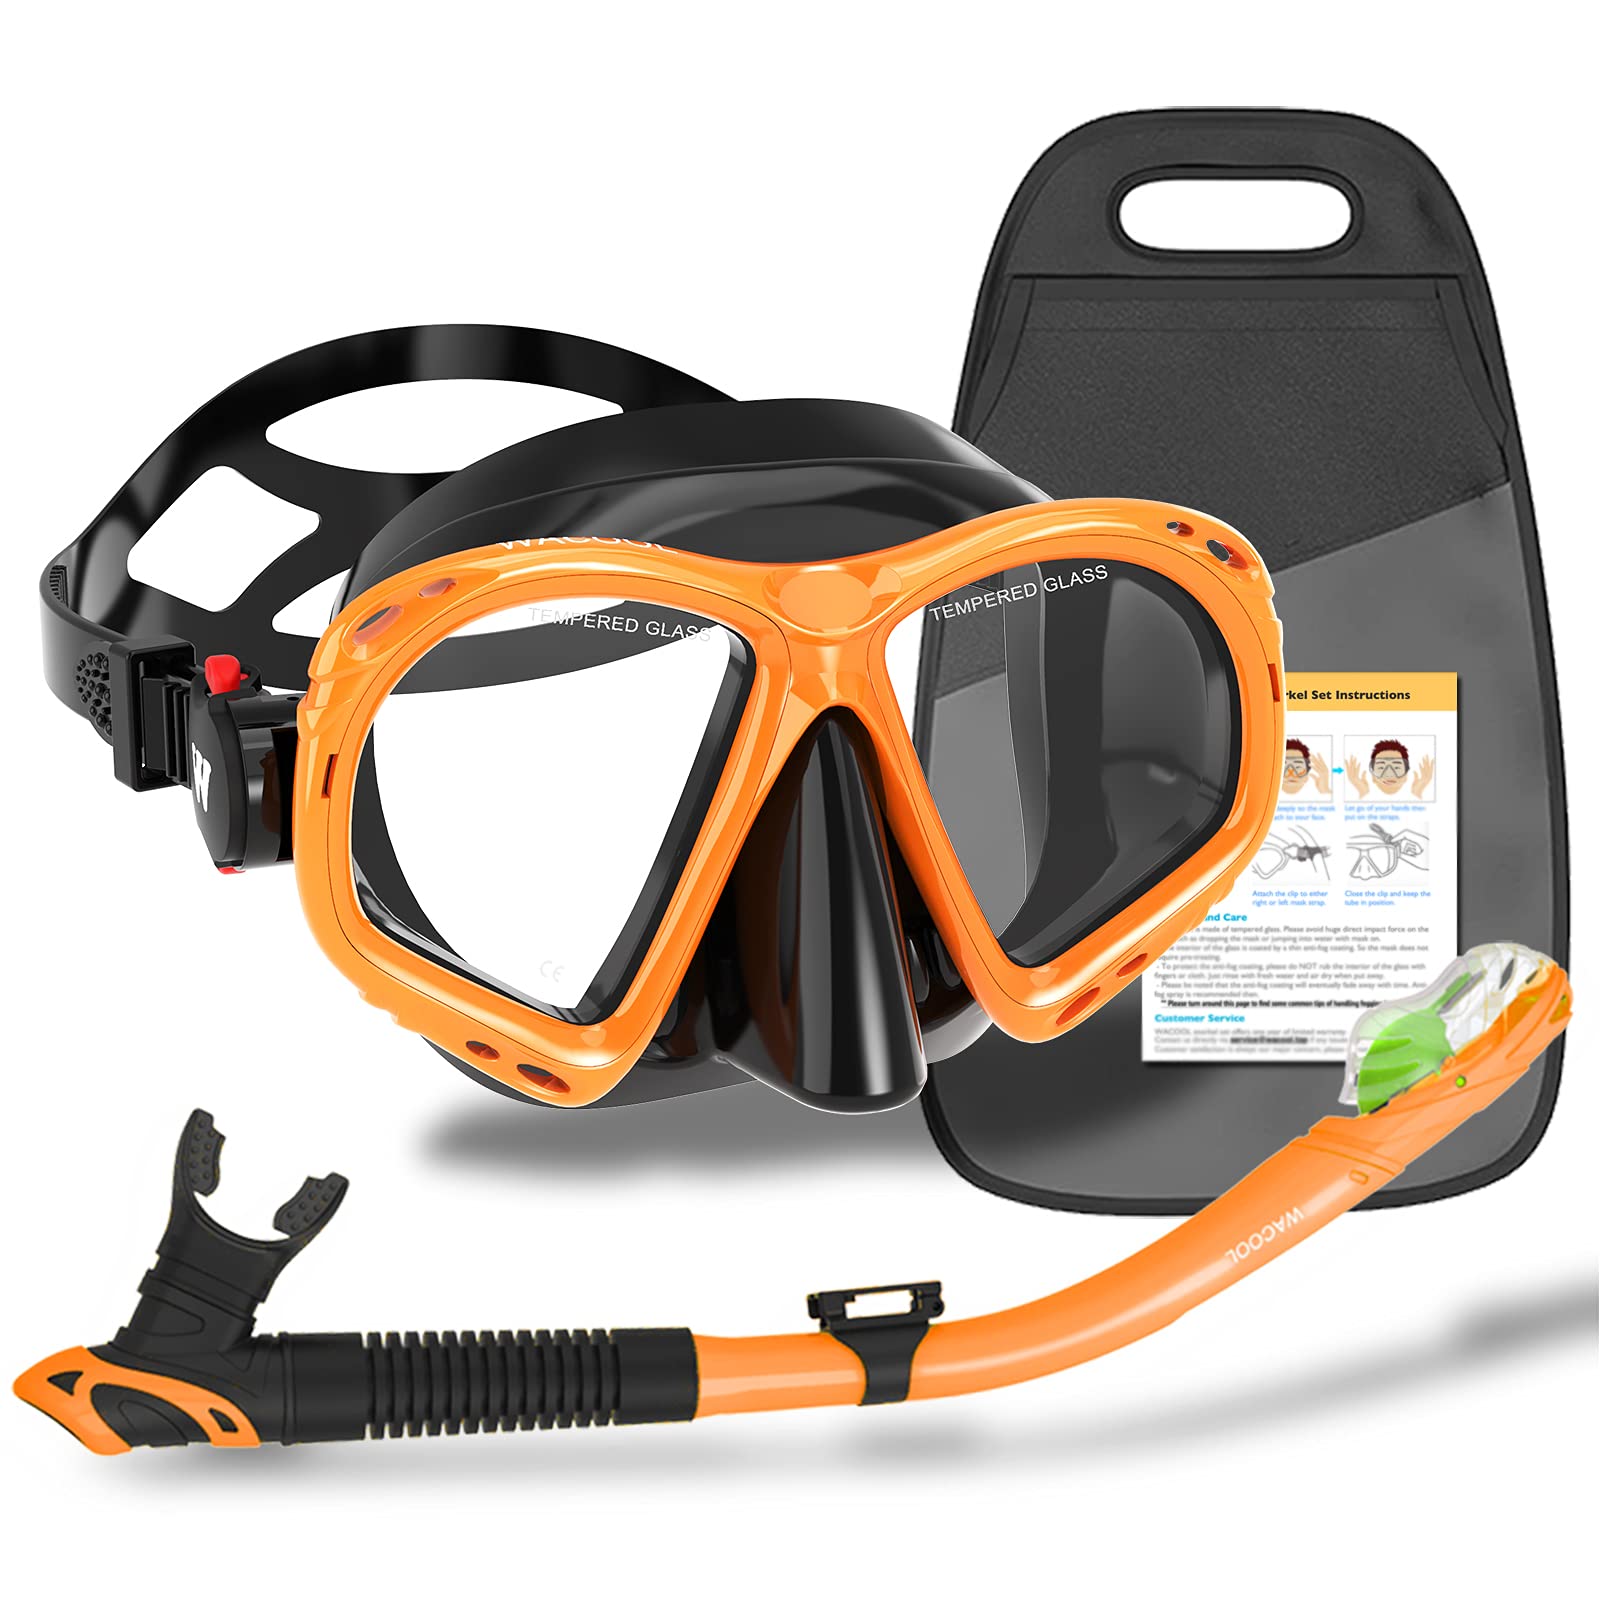 WACOOL Professional Adult Teens Snorkeling Snorkel Diving Scuba Package Set Gear Anti-Fog Coated Glass with Silicon Mouth Piece Purge Valve and… – WACOOL , SKU-B082X32Y6Y – fado.vn 🛒Top1Shop🛒 🇻🇳Top1Vietnam🇻🇳 🛍🛒 🇻🇳🇻🇳🇻🇳🛍🛒